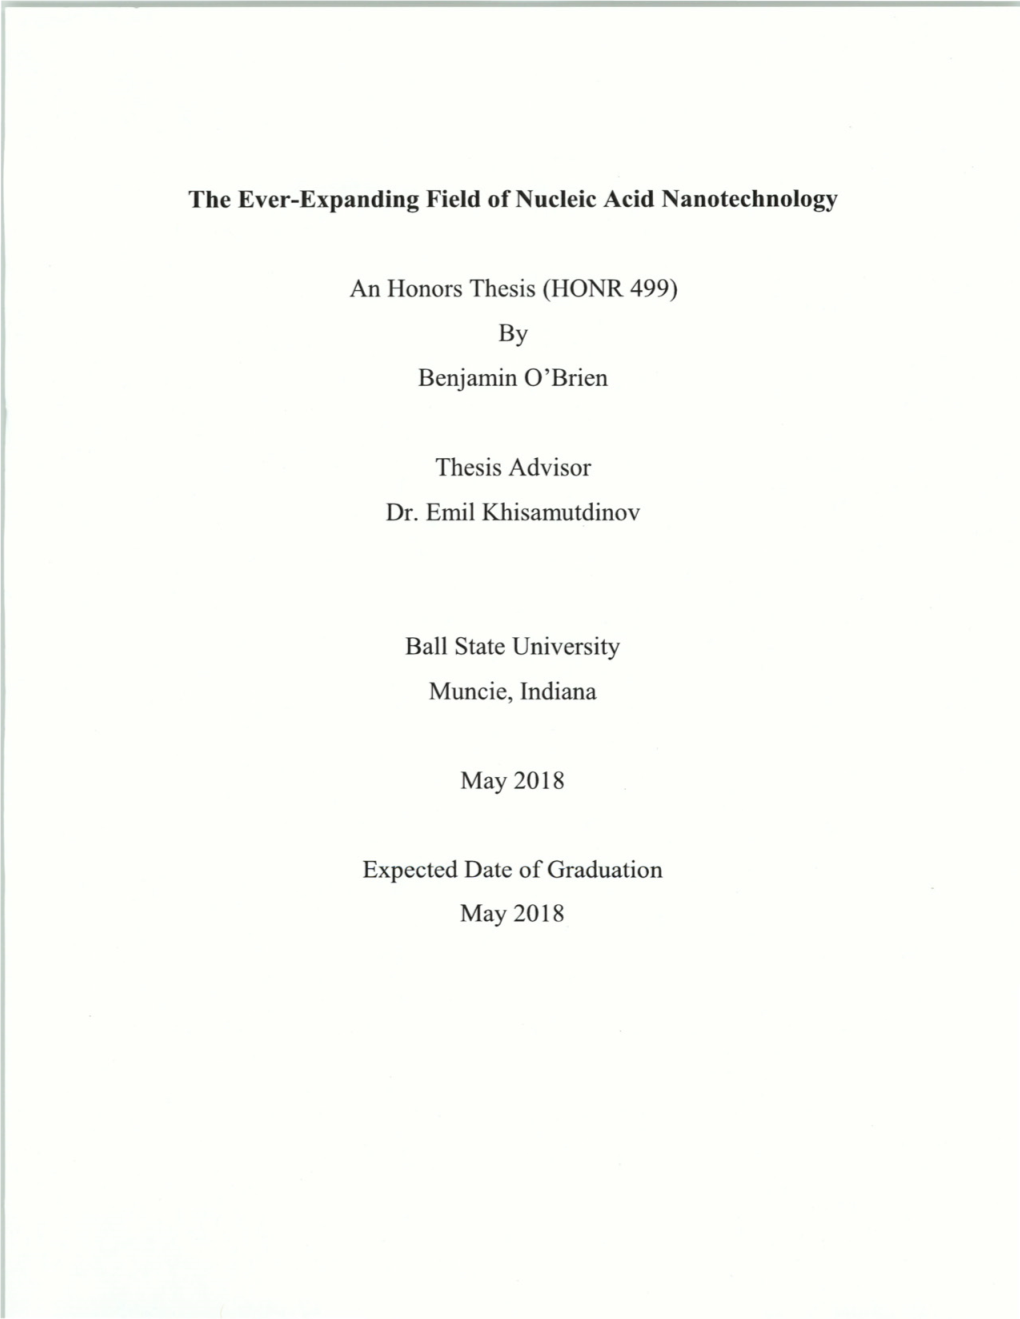 The Ever-Expanding Field of Nucleic Acid Nanotechnology an Honors Thesis (HONR 499) by Benjamin 0 'Brien Thesis Advisor Dr. Emil